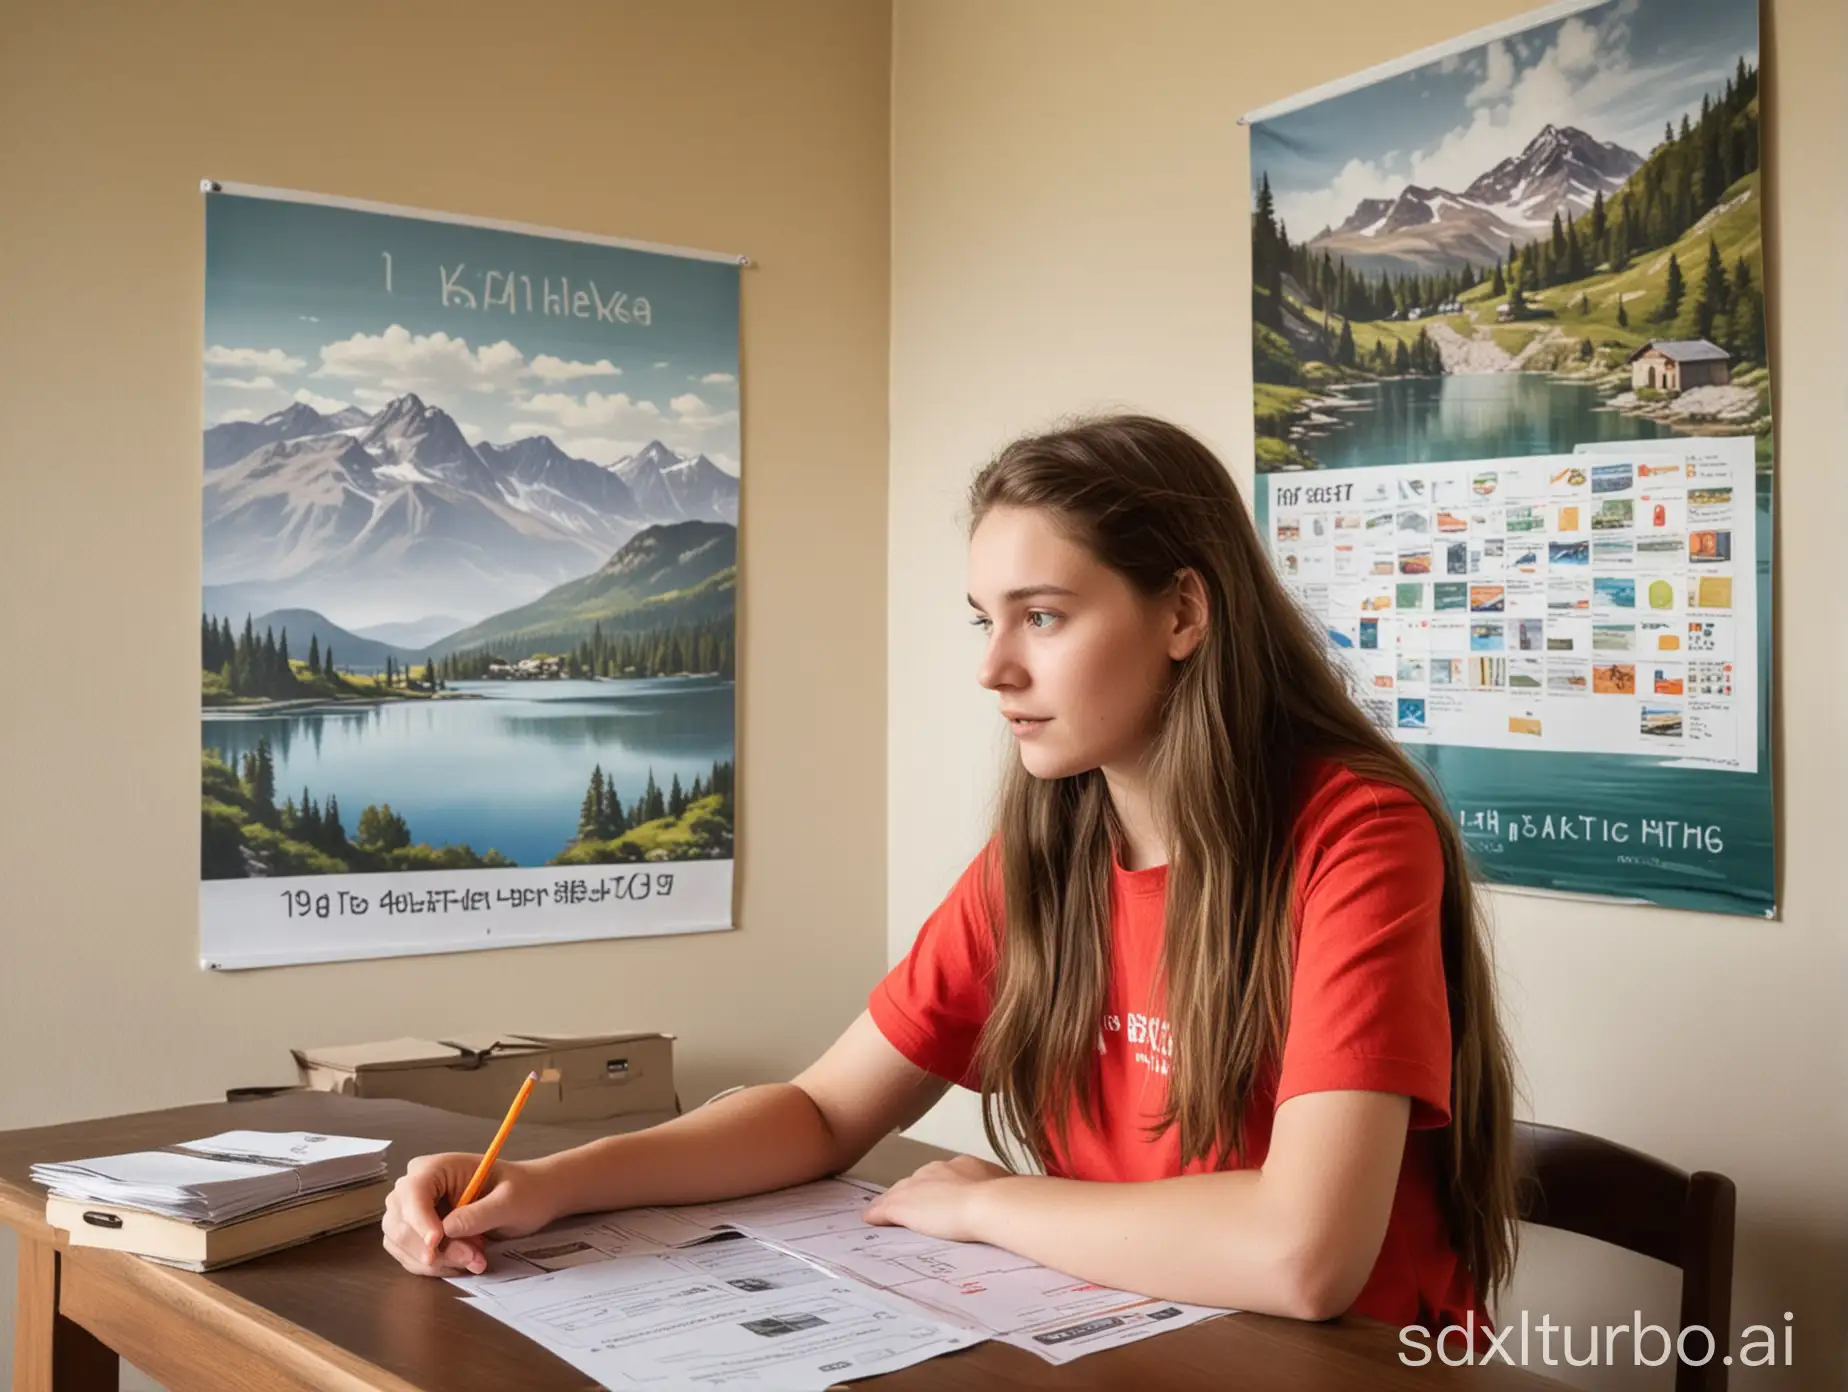 Teenage-Girl-Studying-with-Flashcards-near-Scenic-Poster